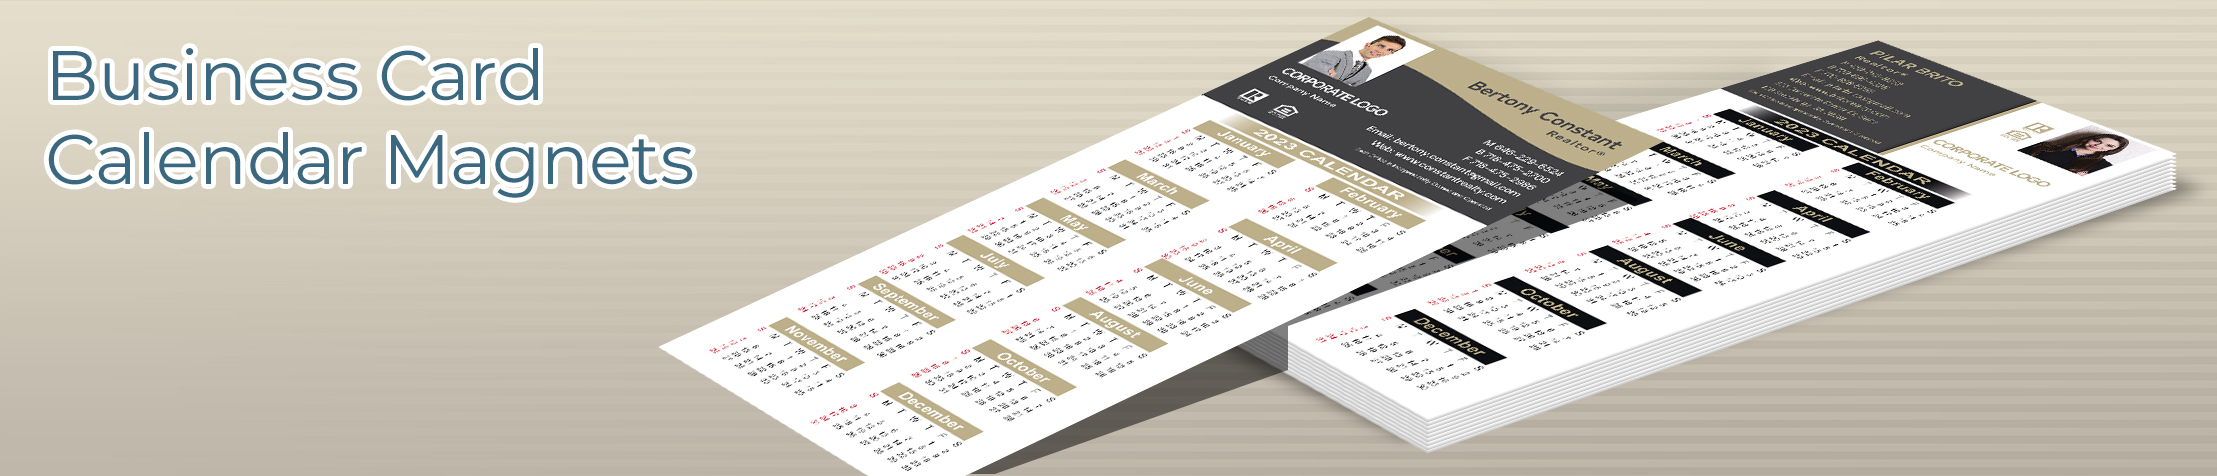 Century 21 Real Estate Business Card Calendar Magnets - Century 21  2019 calendars with photo and contact info | BestPrintBuy.com